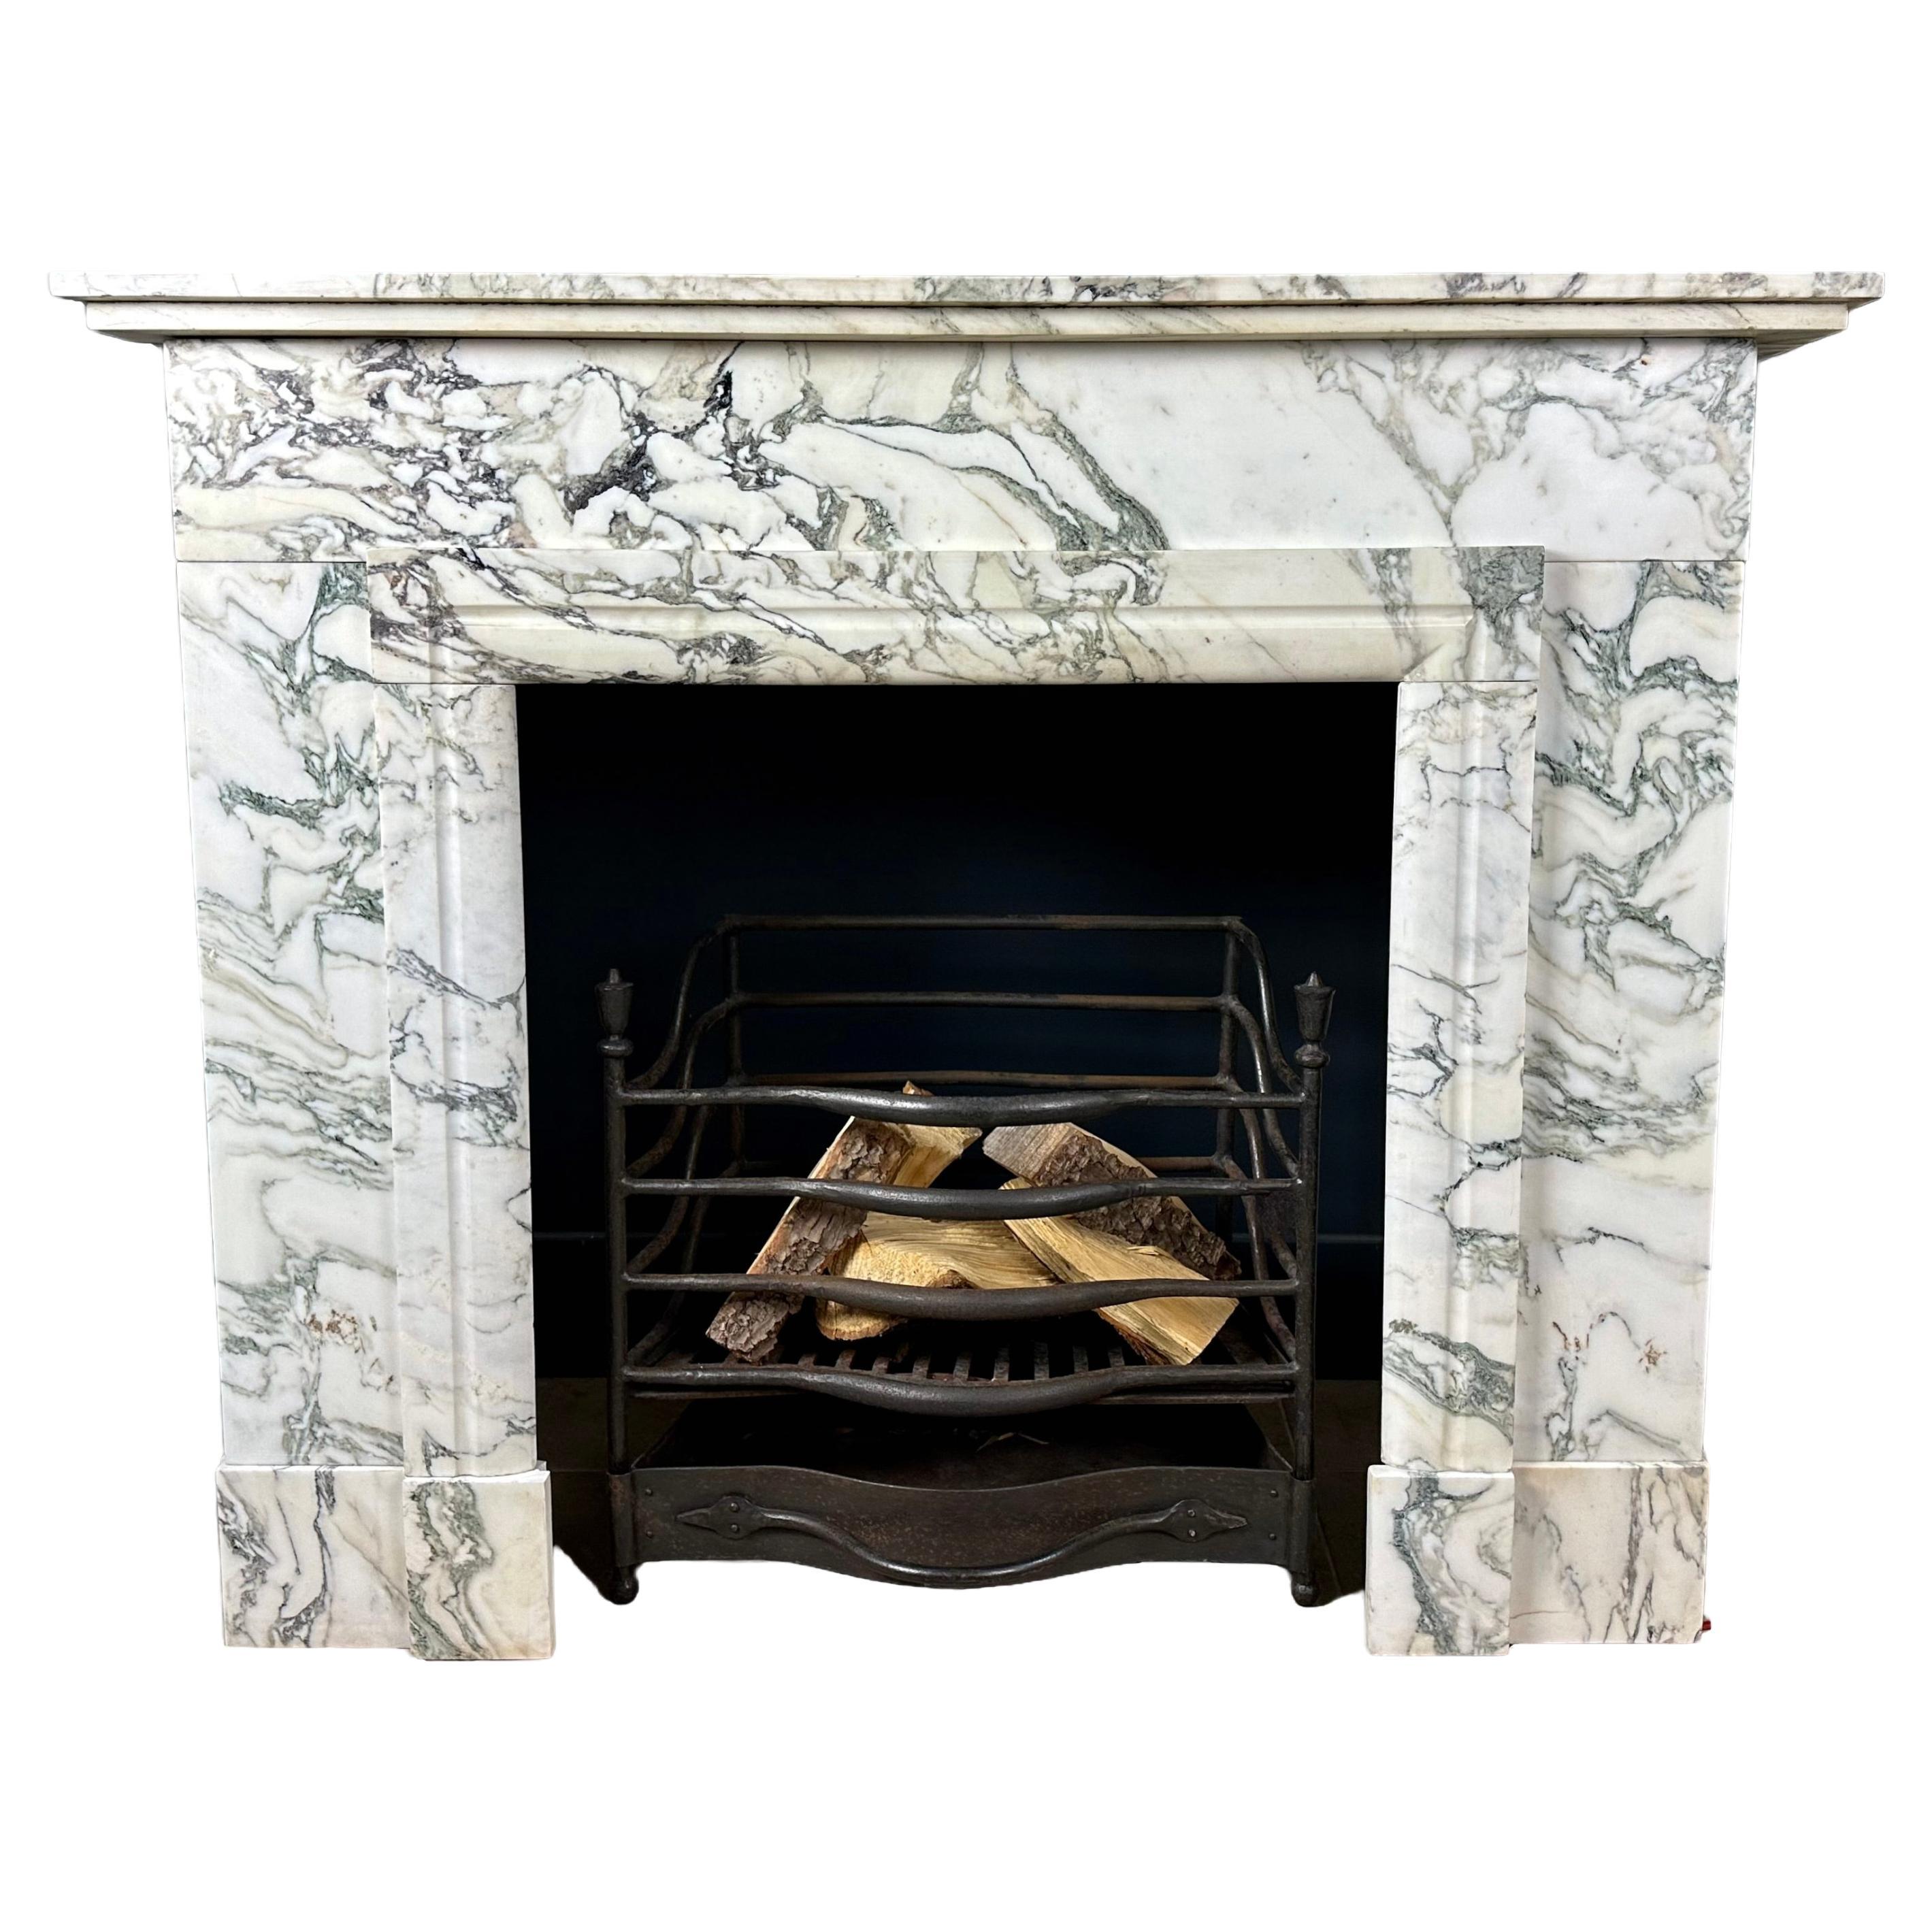 Art Deco White Marble Antique Fireplace with Beautiful Veining